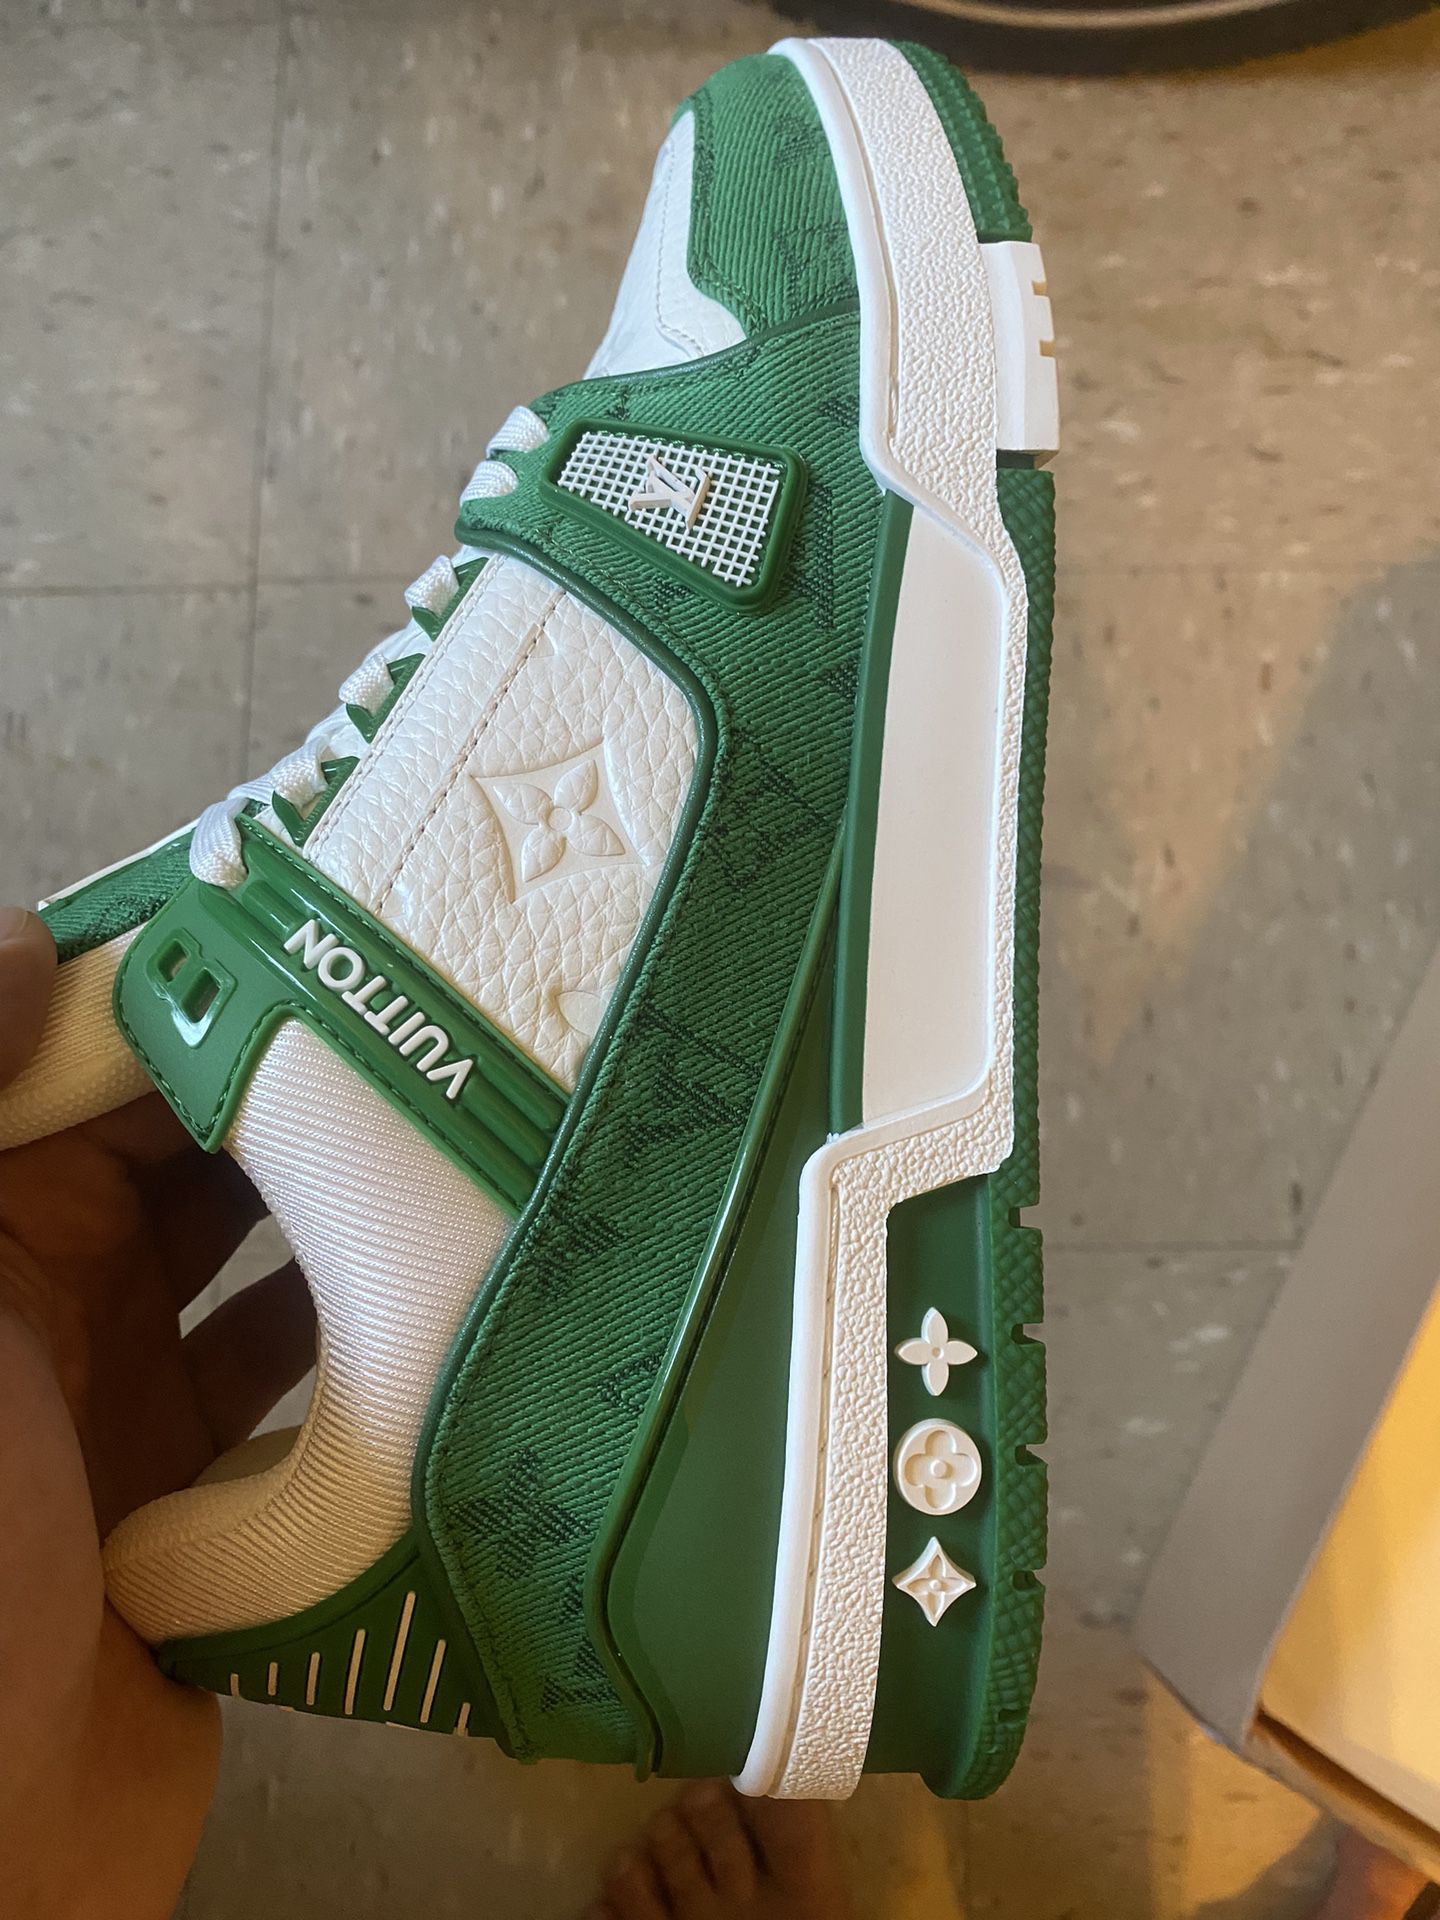 Louis Vuitton LV Trainer Green Size:lv8 us9 for Sale in Weehawken, NJ -  OfferUp